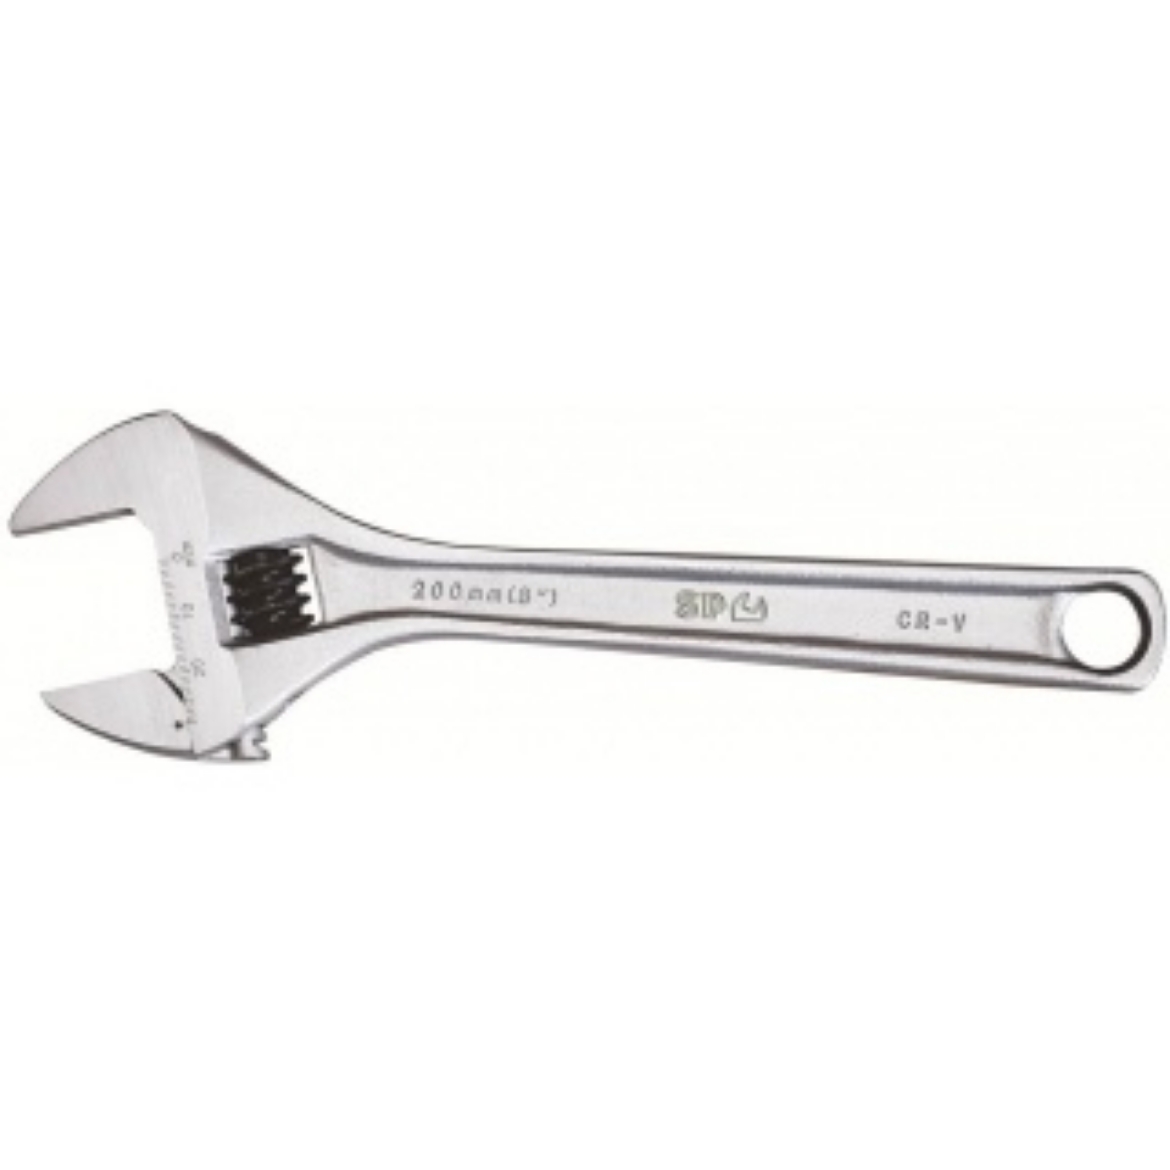 Picture of WRENCH ADJUSTABLE PREMIUM CHROME 375MM SP TOOLS (Replaces SP18037)